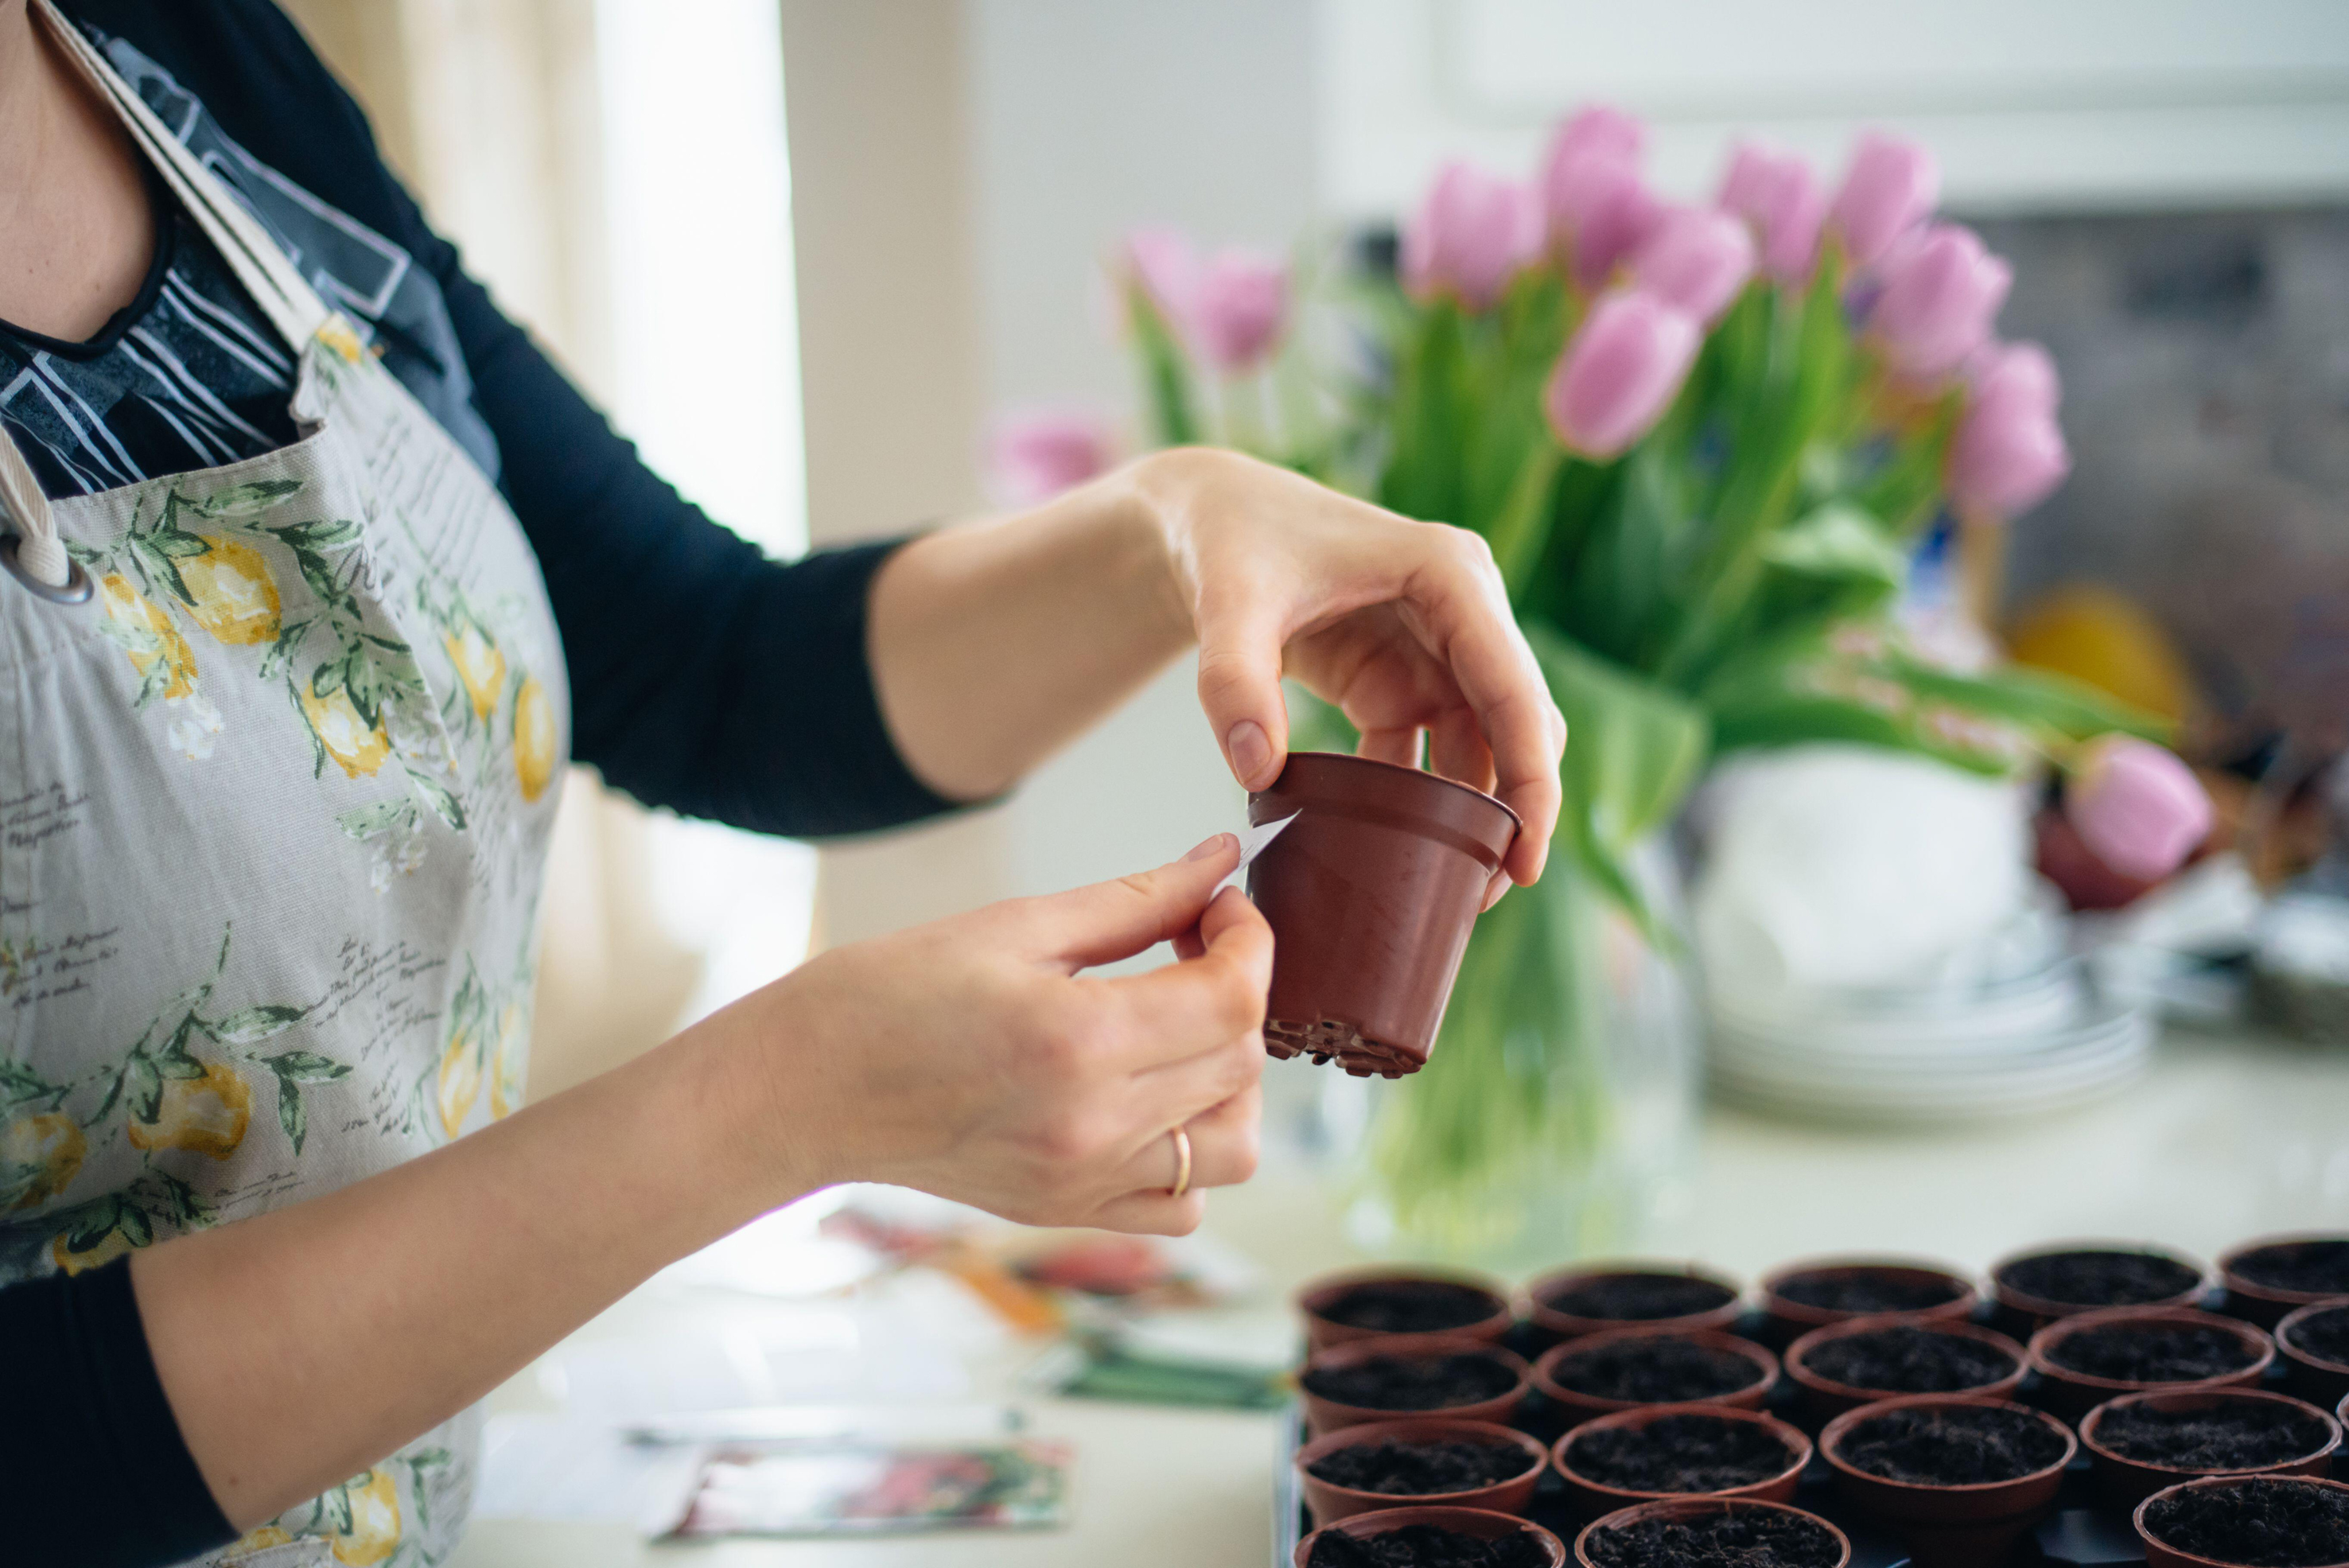 Woman putting stickers on small pots with seeds